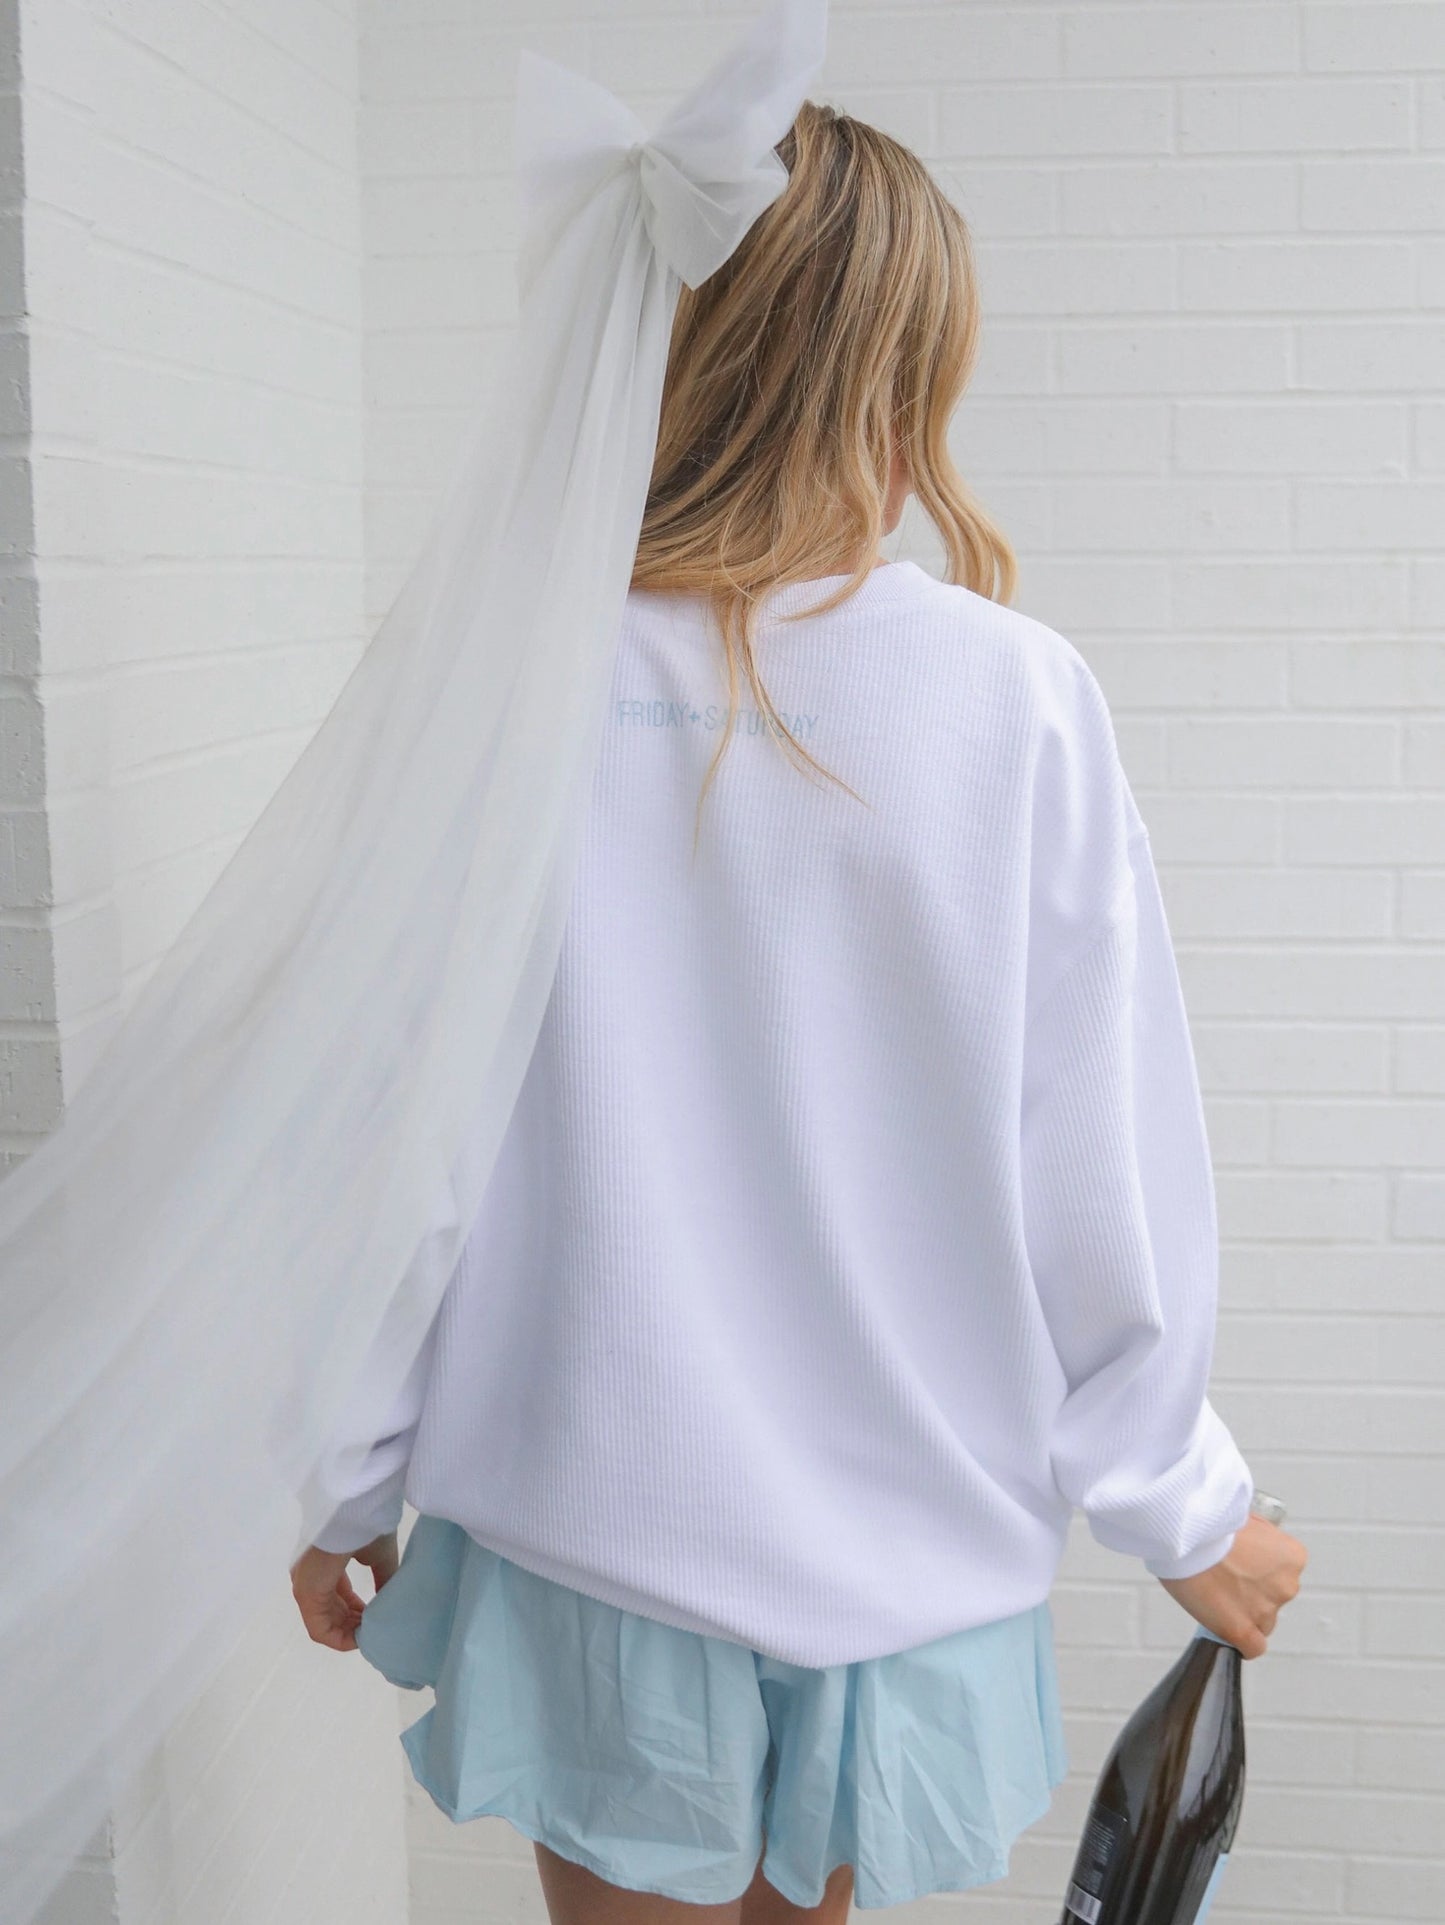 White Corded Corded Sweatshirt With Bride in Blue